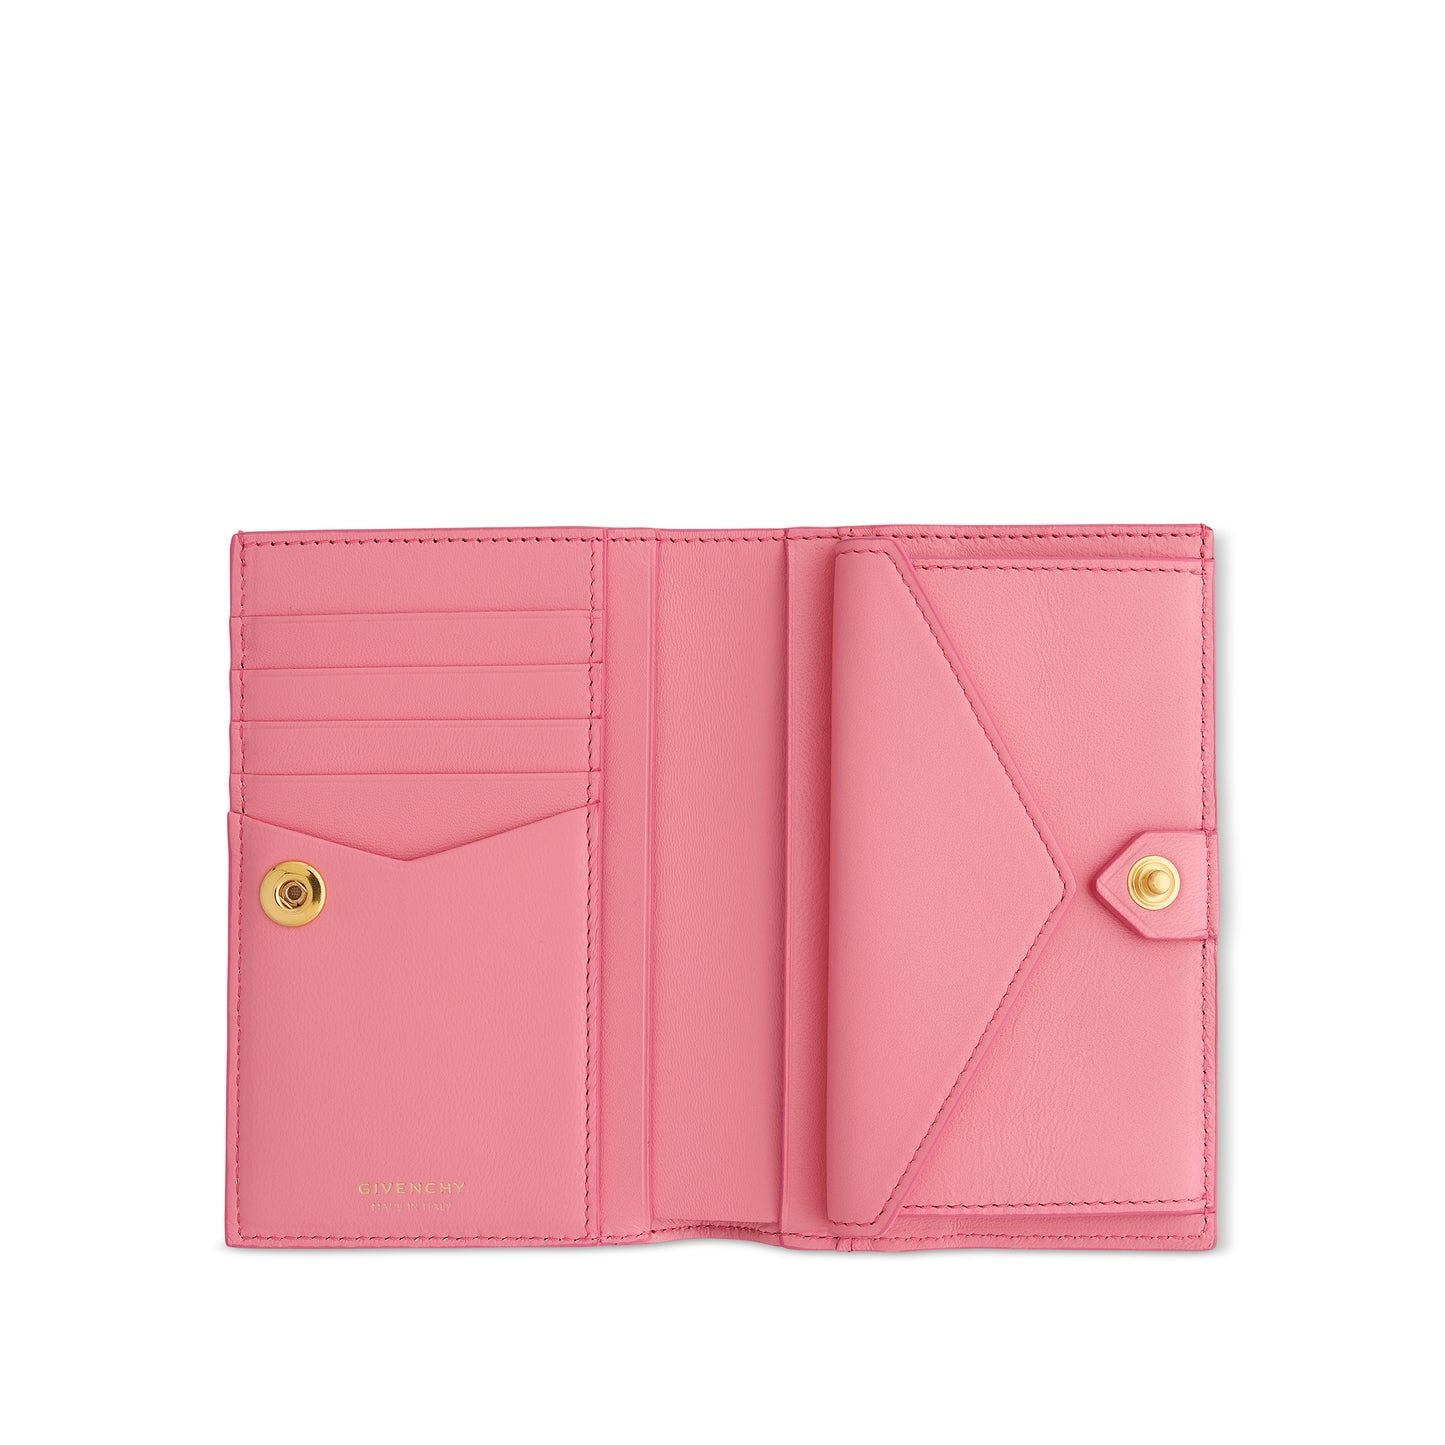 G Cut Bifold Wallet in 4G Coated Canvas in Bright Pink